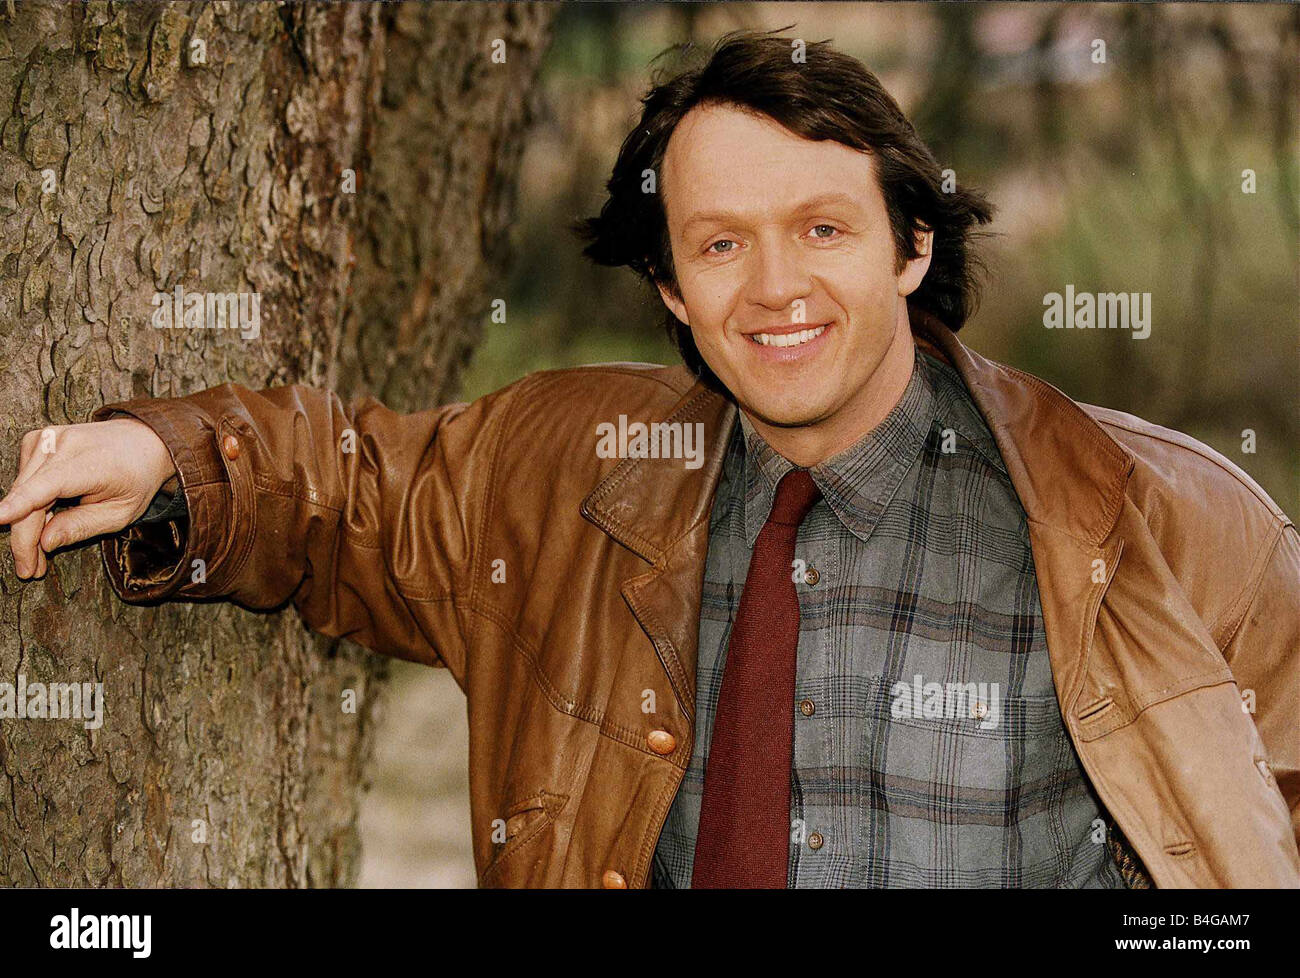 Kevin Whately Actor who appeared in Top Television Drama Peak Practice and Inspector Morse Stock Photo